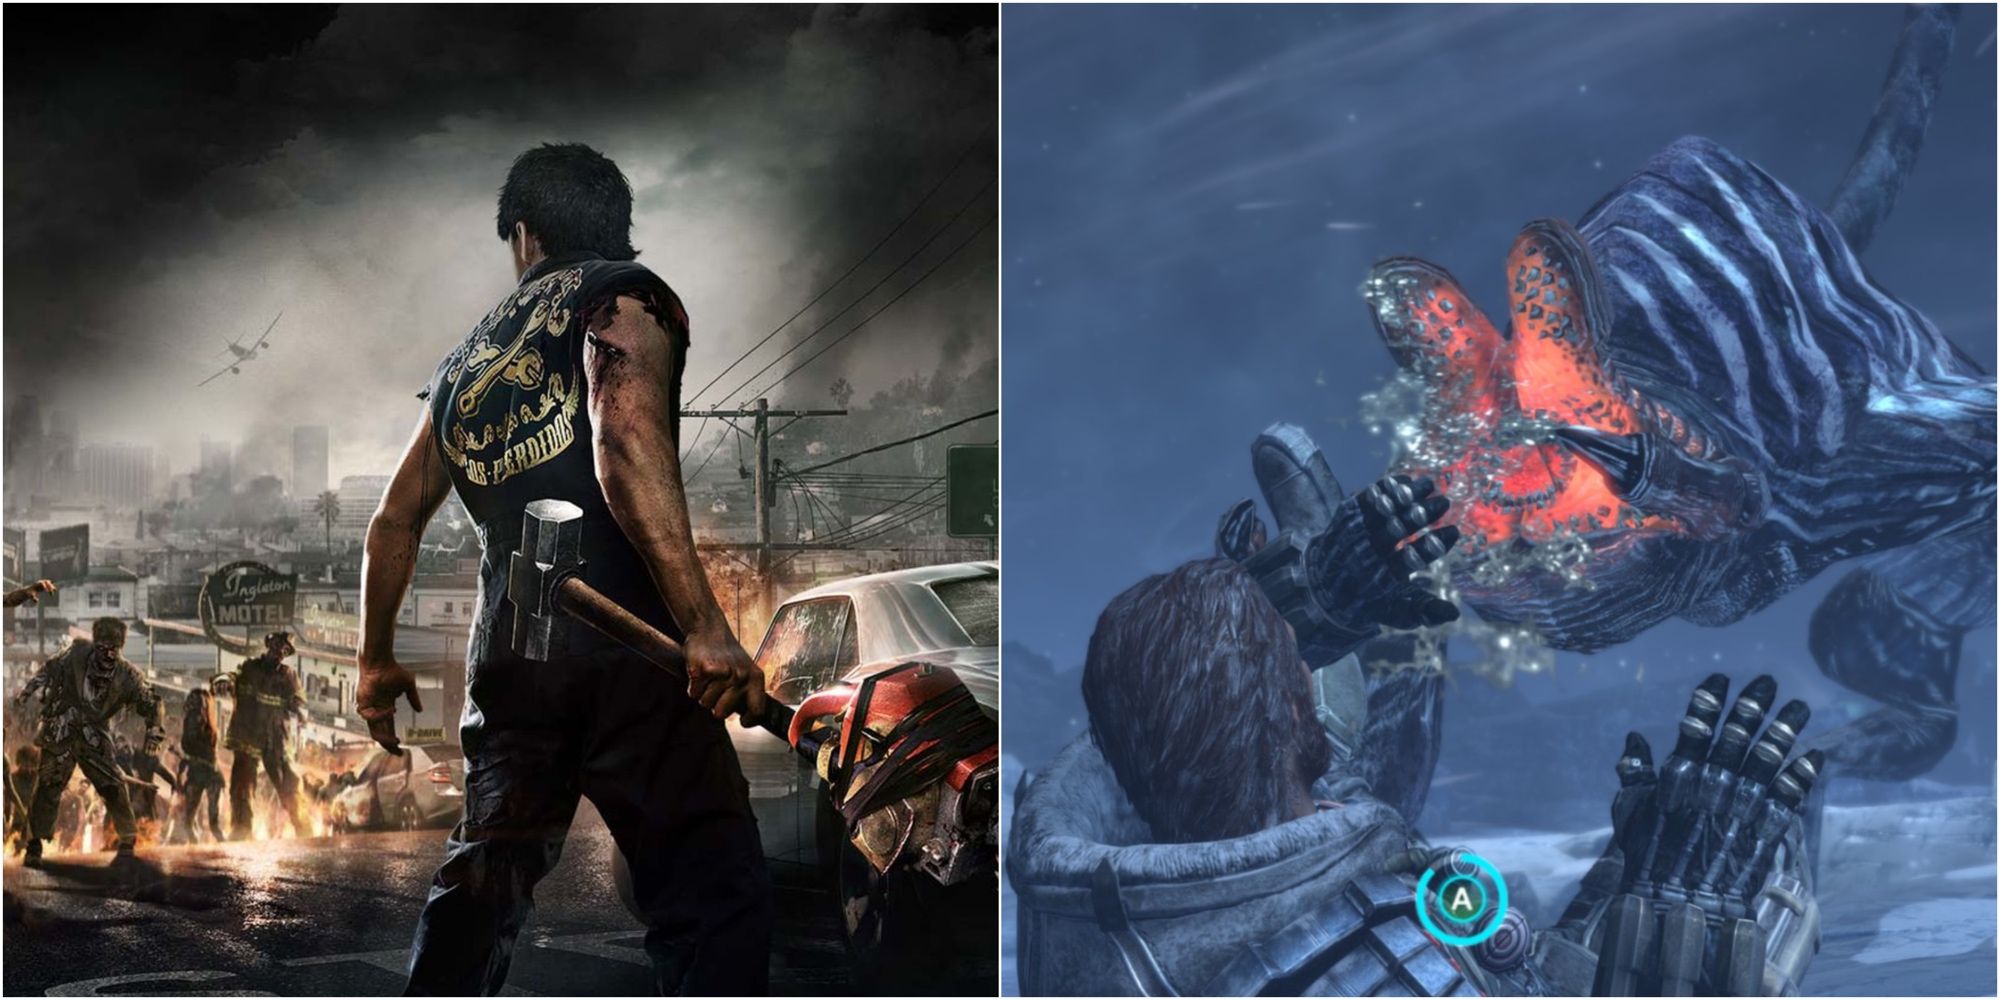 Dead Rising 3 and Lost Planet 3